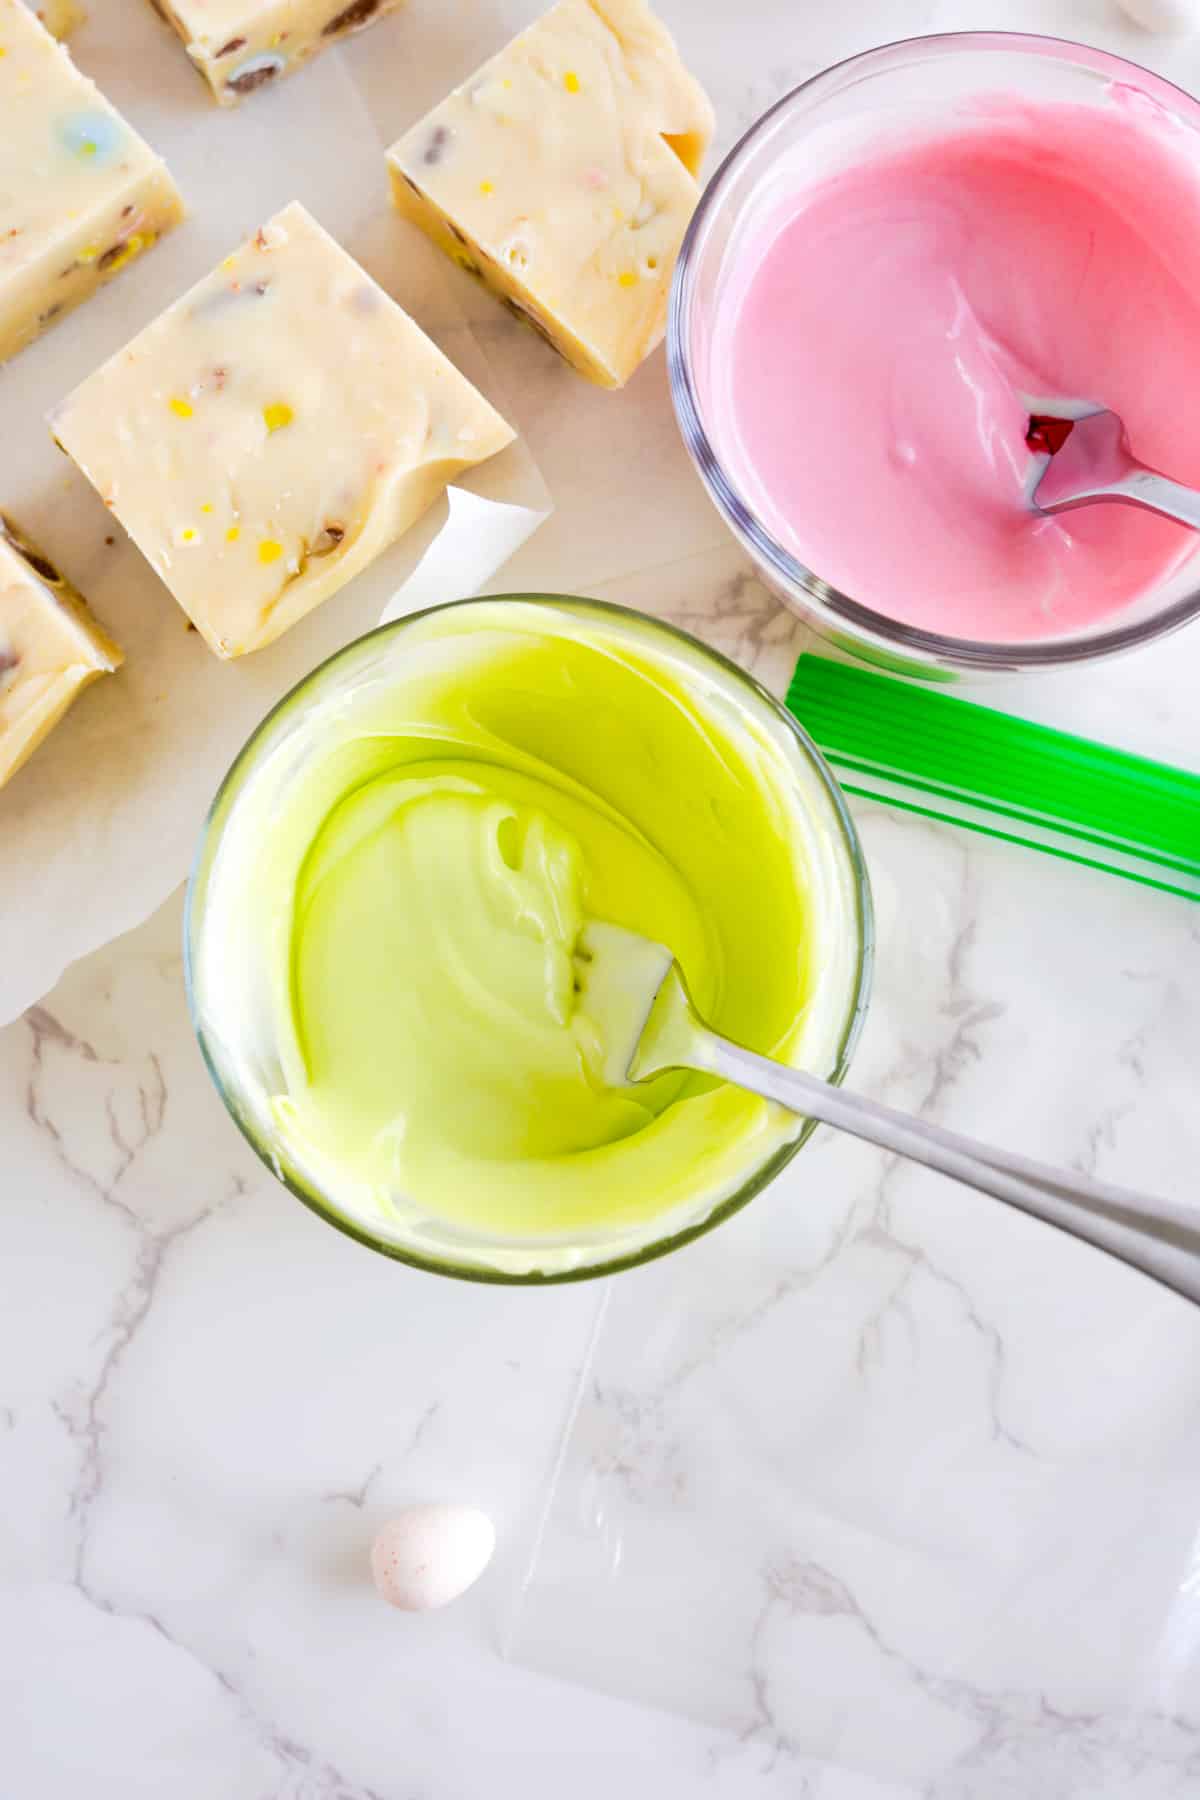 Green and pink candy melts melted in bowls with a fork to stir from above next to pieces of white chocolate fudge.